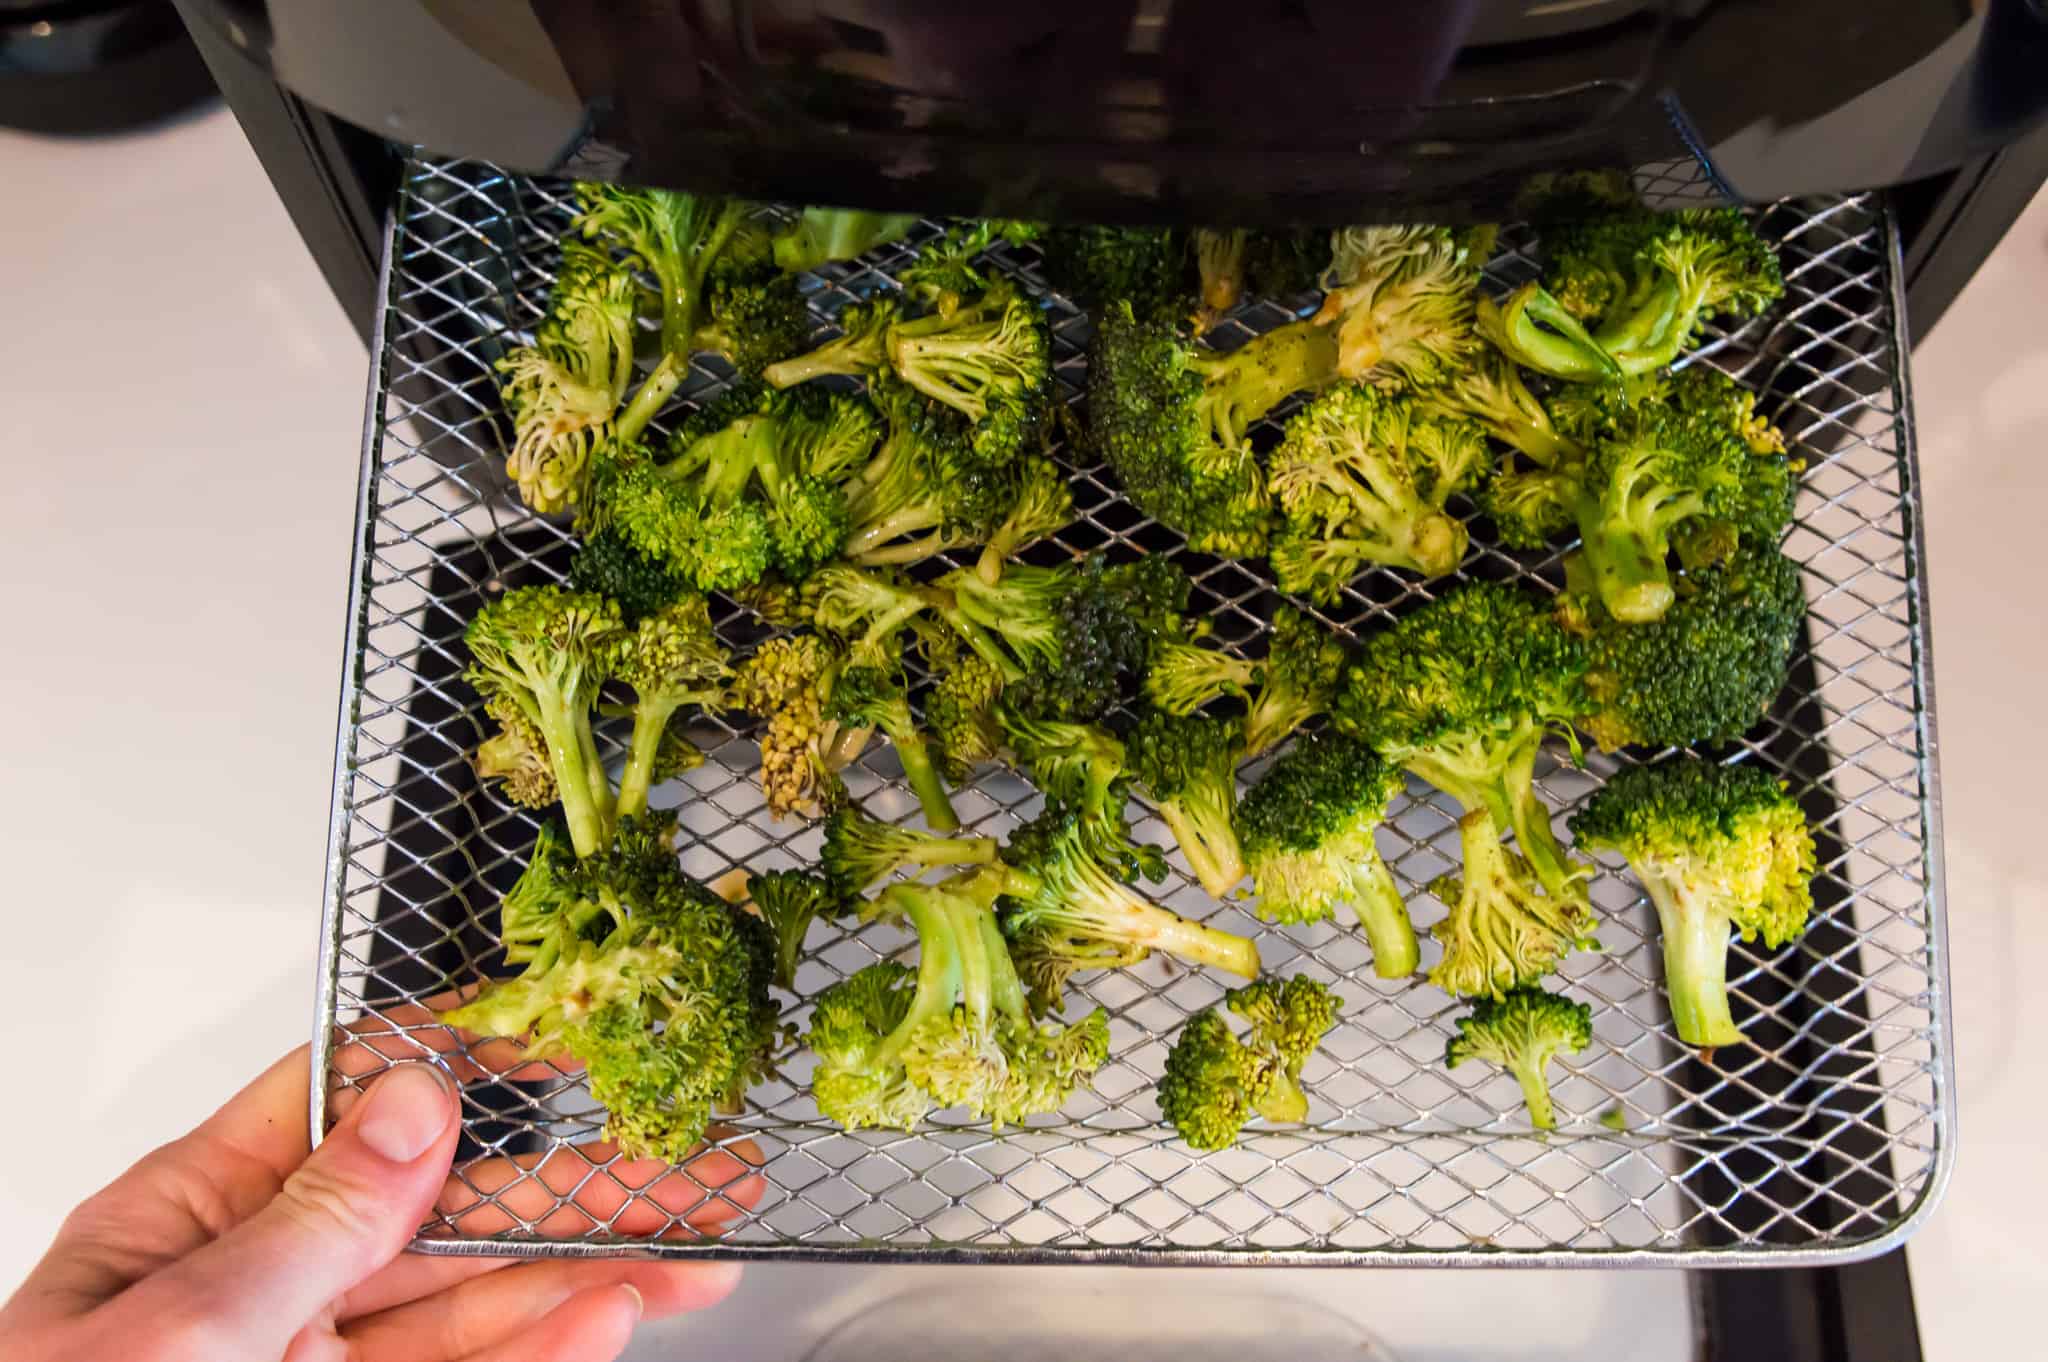 Broccoli pieces on an air fryer tray.